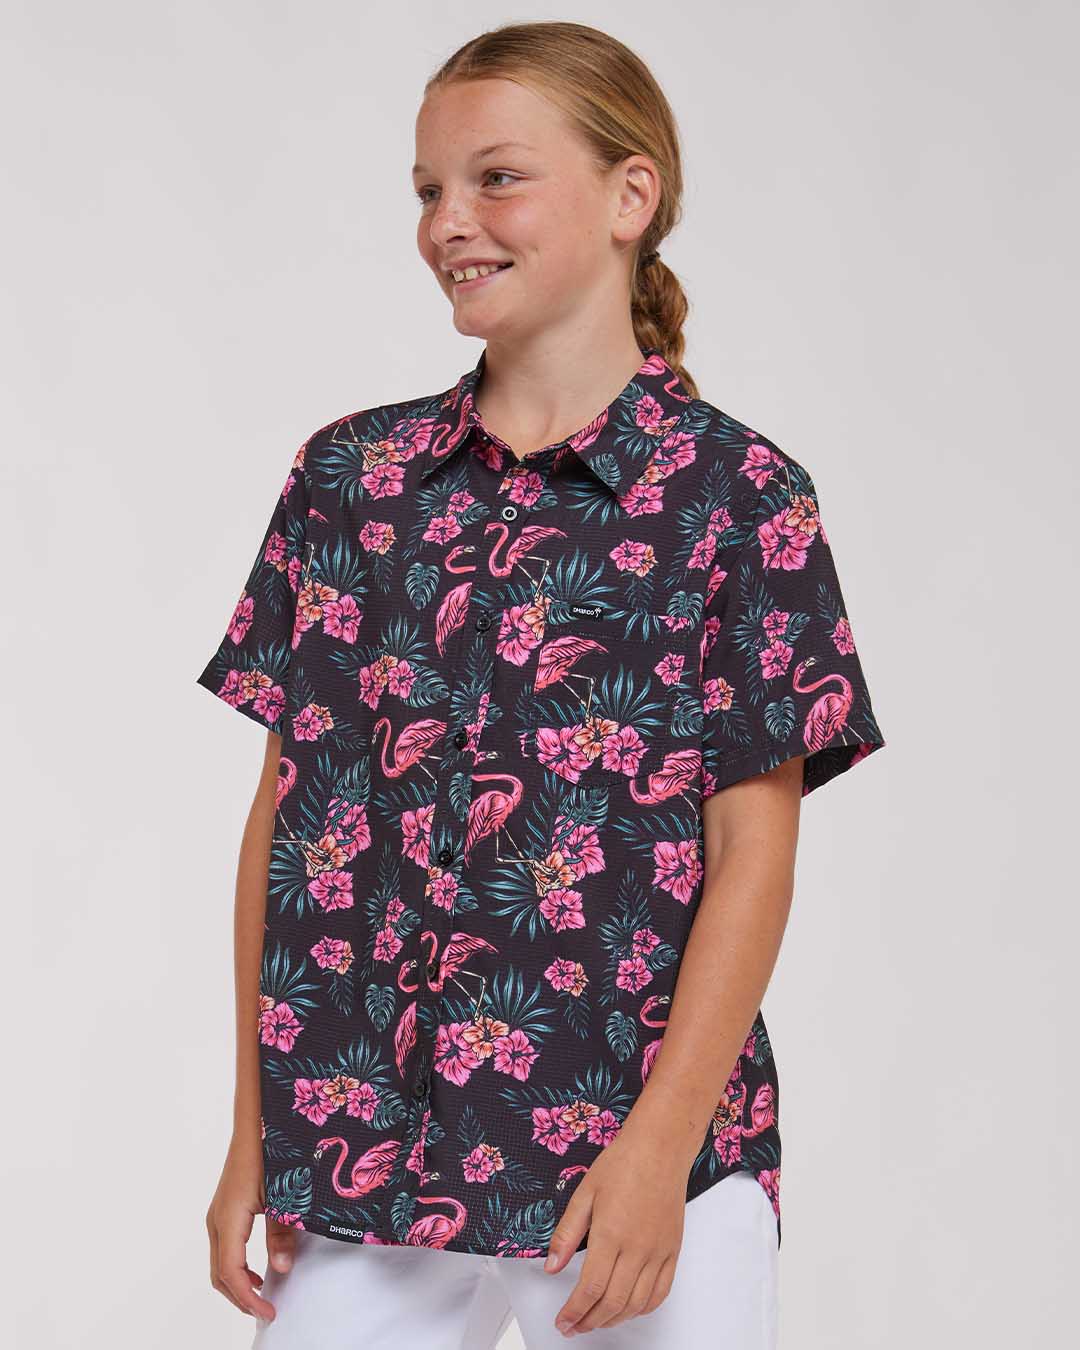 Youth Tech Party Shirt | Parker